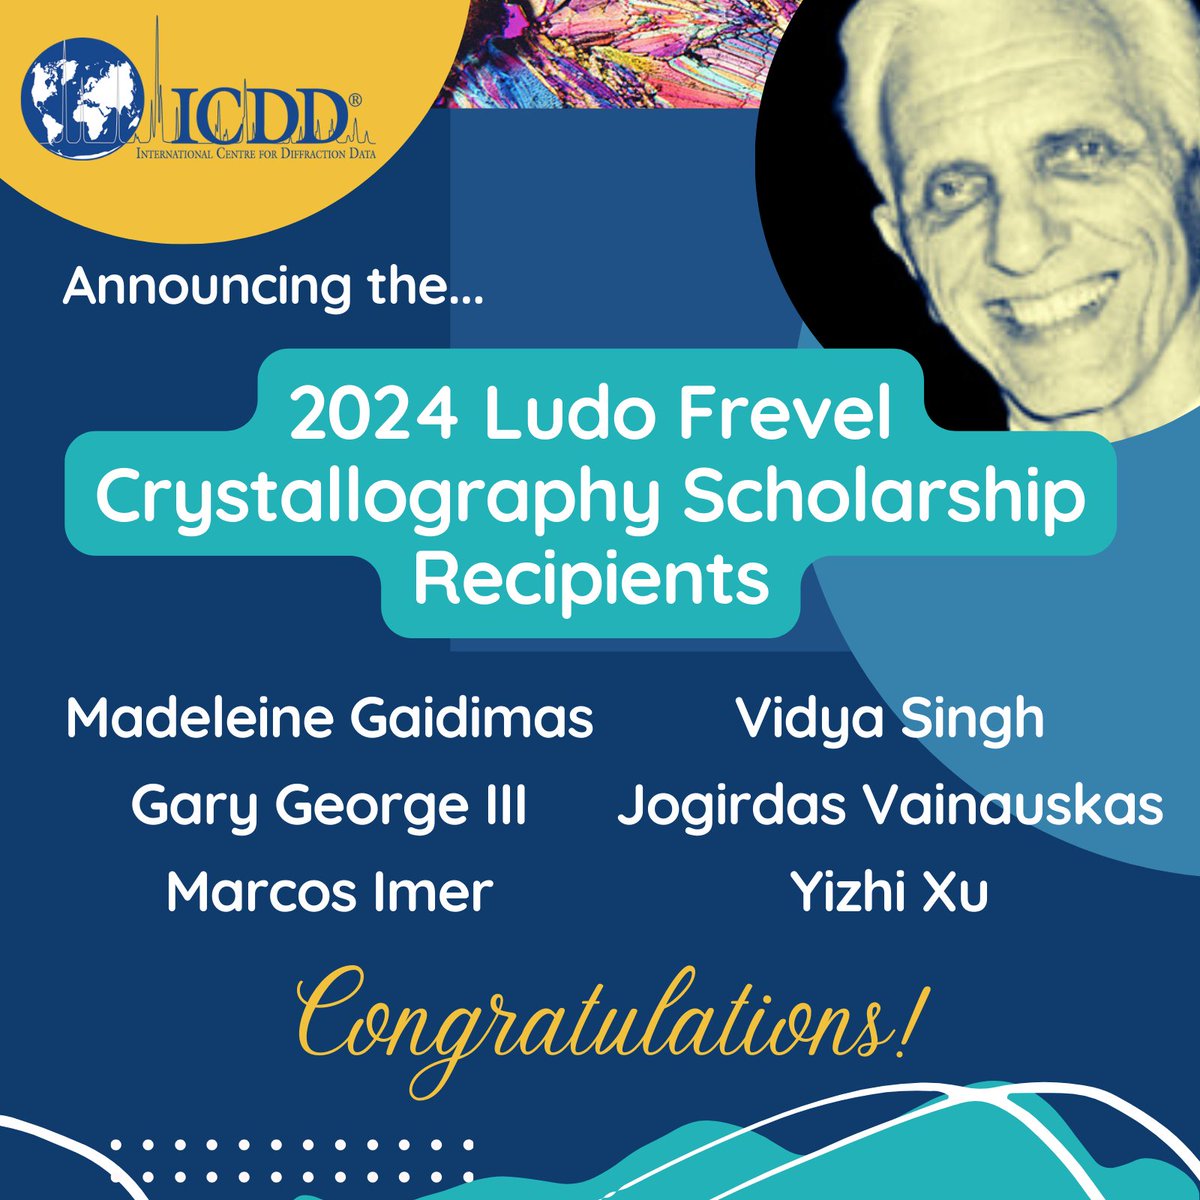 Congratulations to this years Ludo Frevel Crystallography Scholarship Recipients! The ICDD will present each of these students with a check for $2,500 to assist in continuing studies in their selected fields of crystallographic research. Learn more at icdd.com/ludo-frevel-sc….